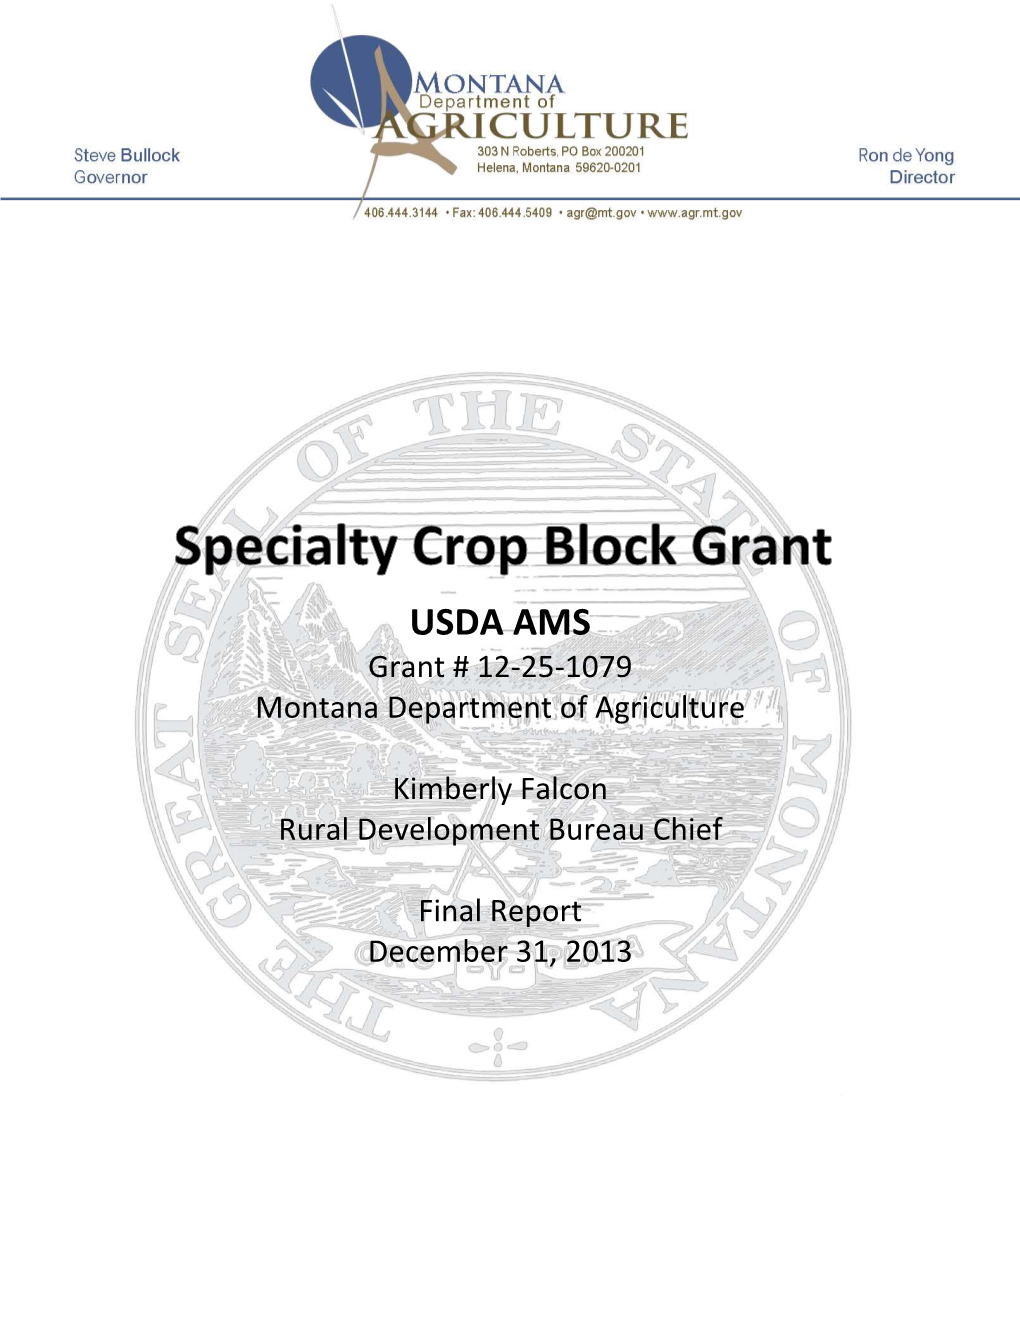 USDA AMS Grant # 12-25-1079 Montana Department of Agriculture